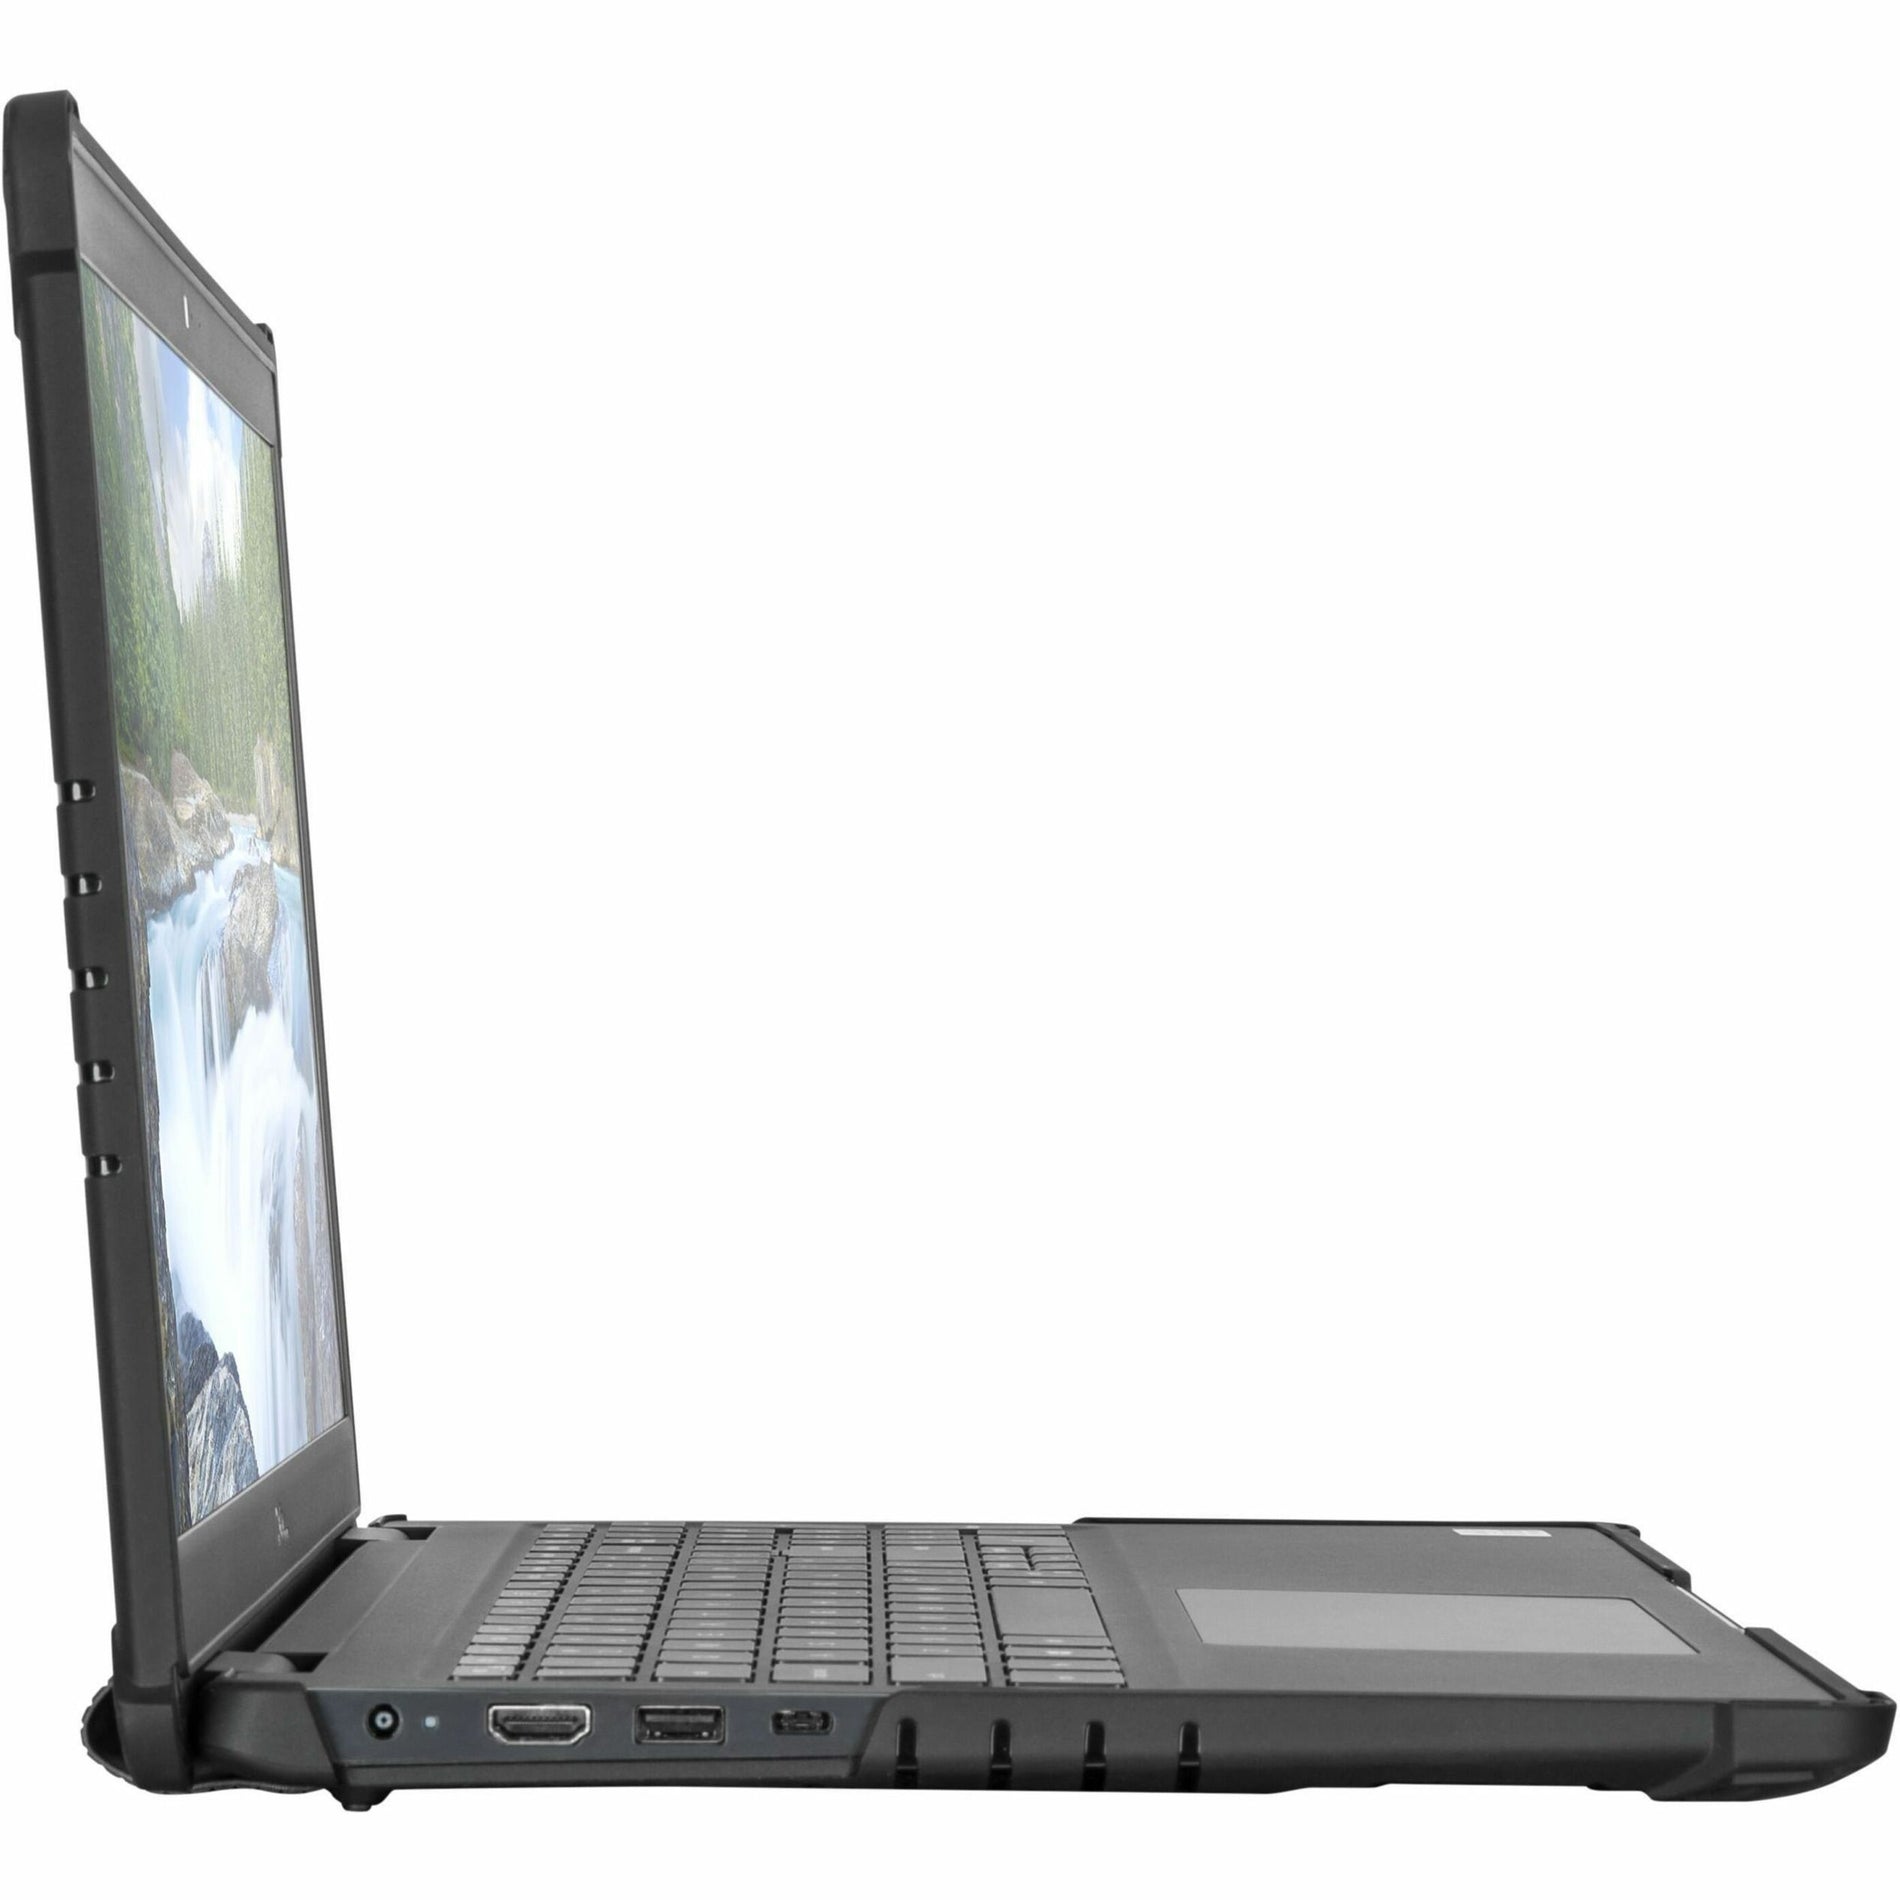 Targus THZ880GL Commercial Grade Form-Fit Cover for Dell Latitude 3510 14in, Lifetime Warranty, Black